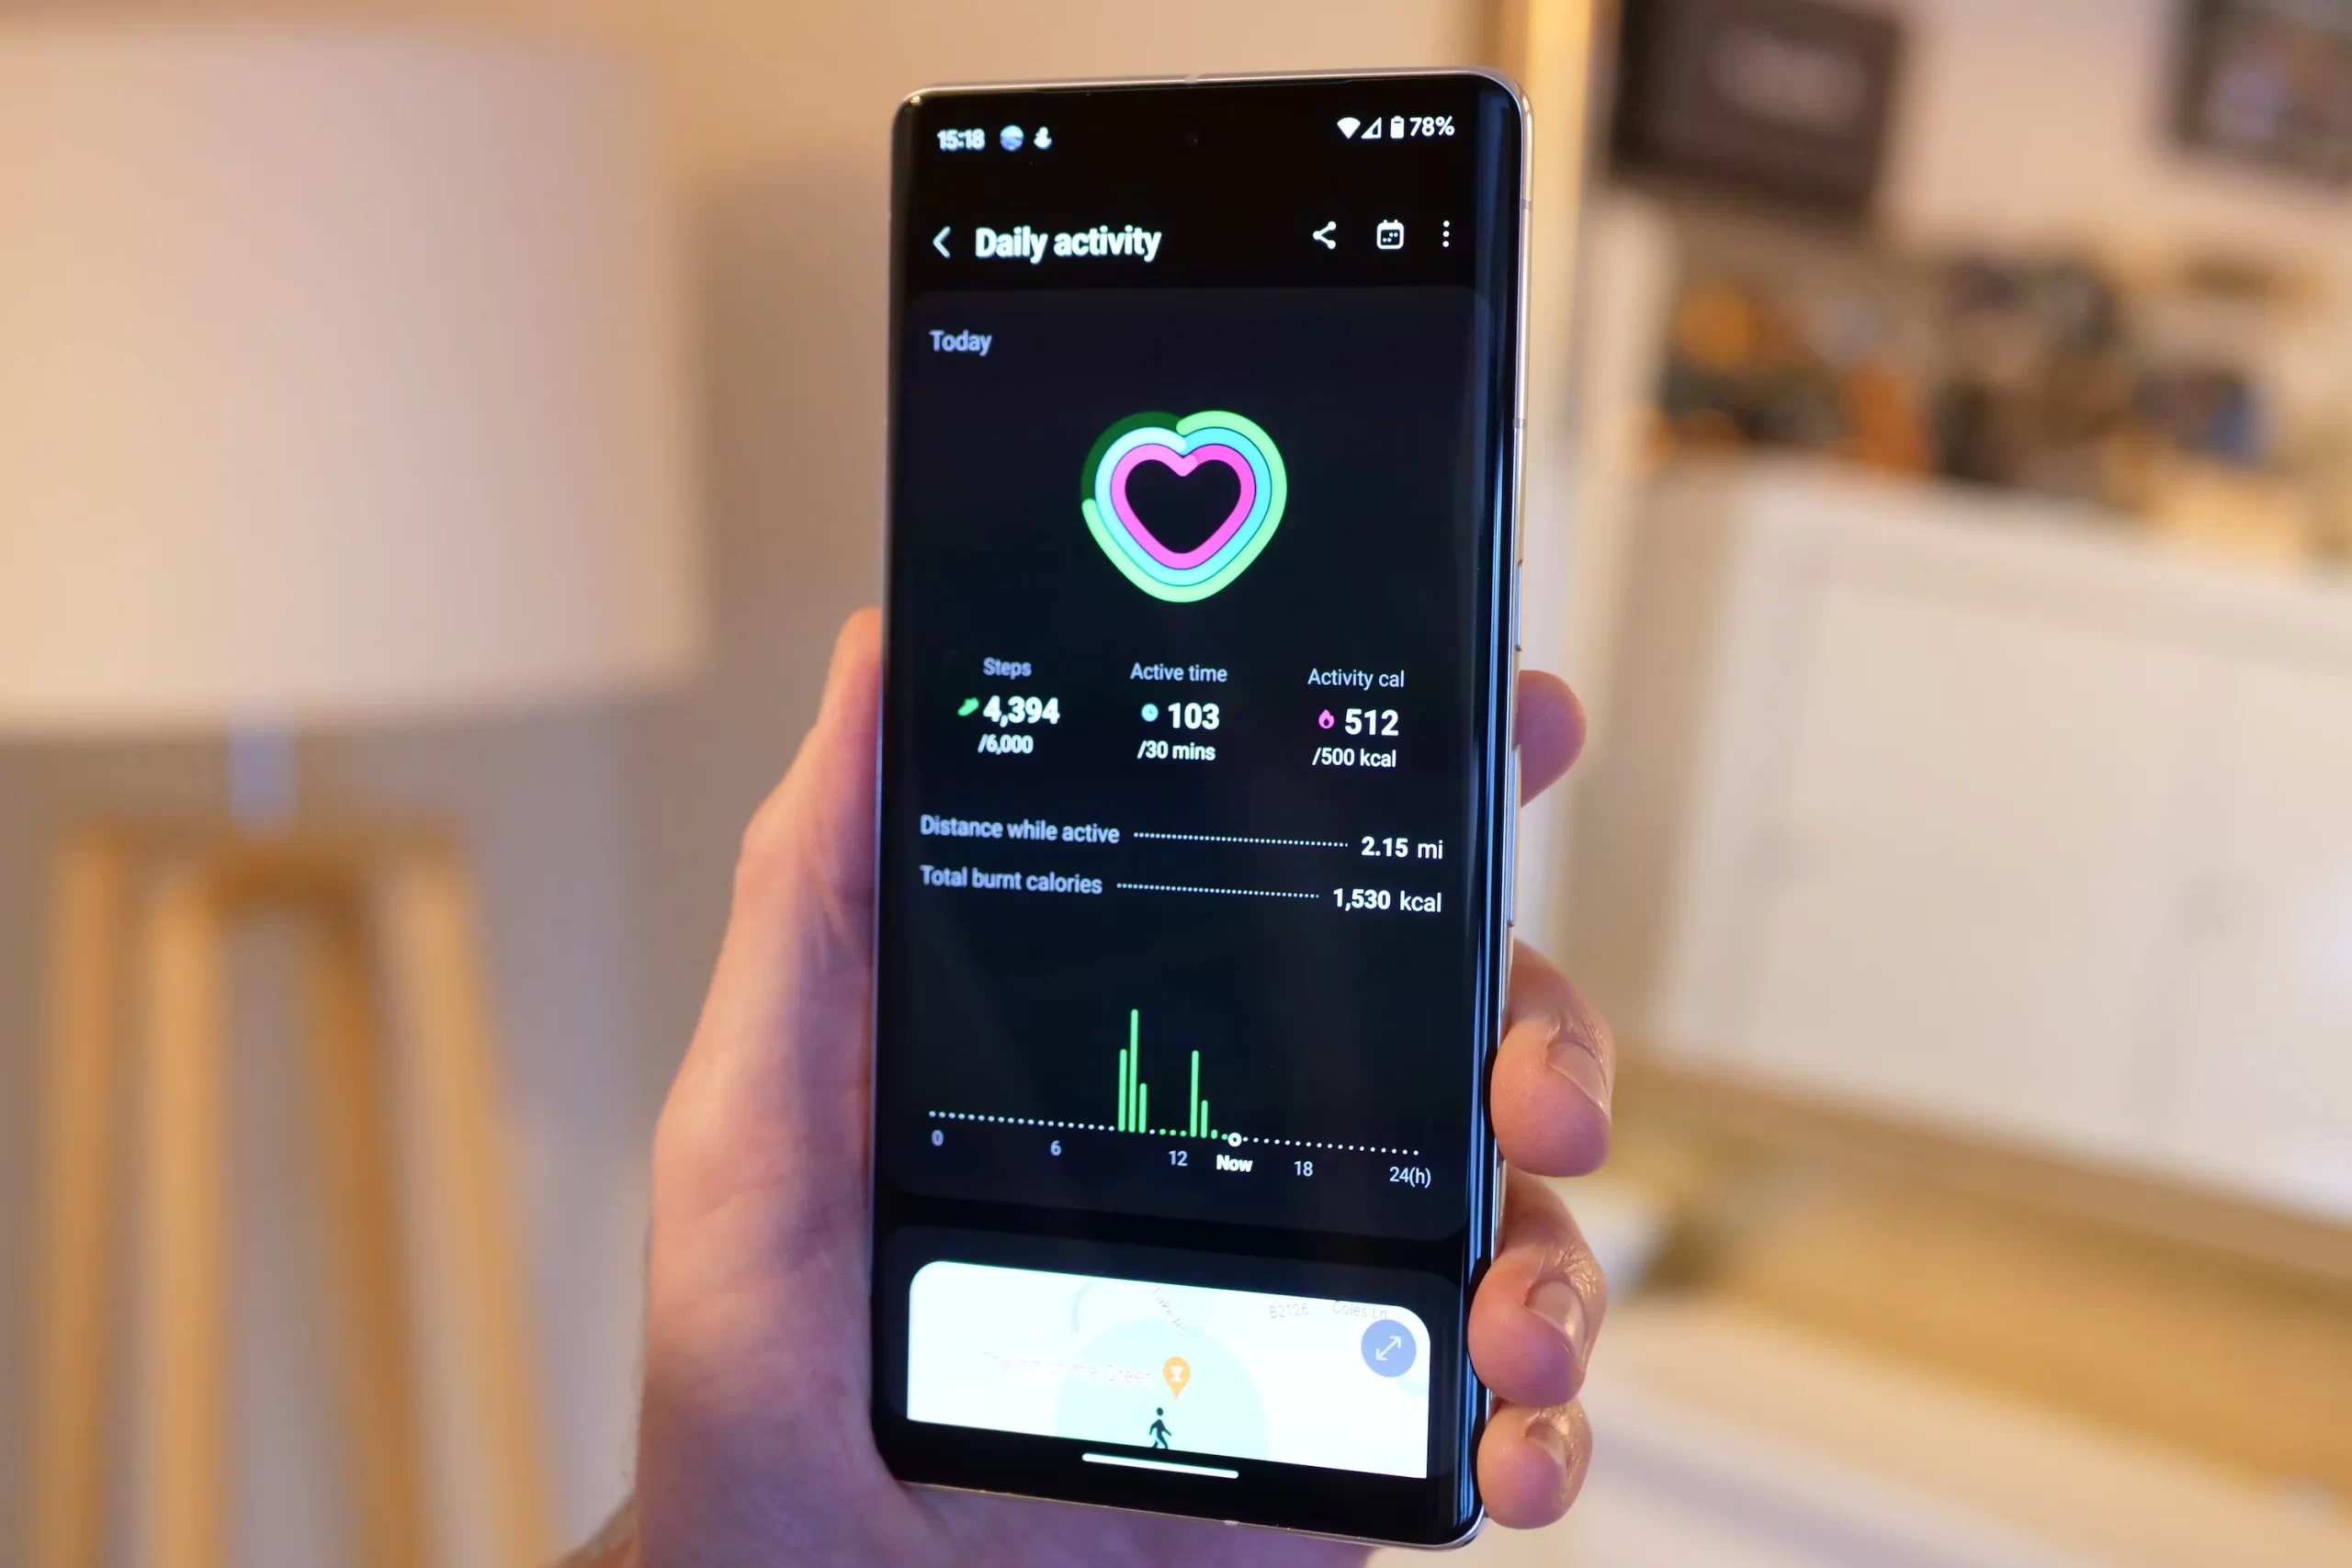 www digitaltrends com Samsung Health Daily Activity scaled - Samsung has issued an update to its Health app for a Personalized Health